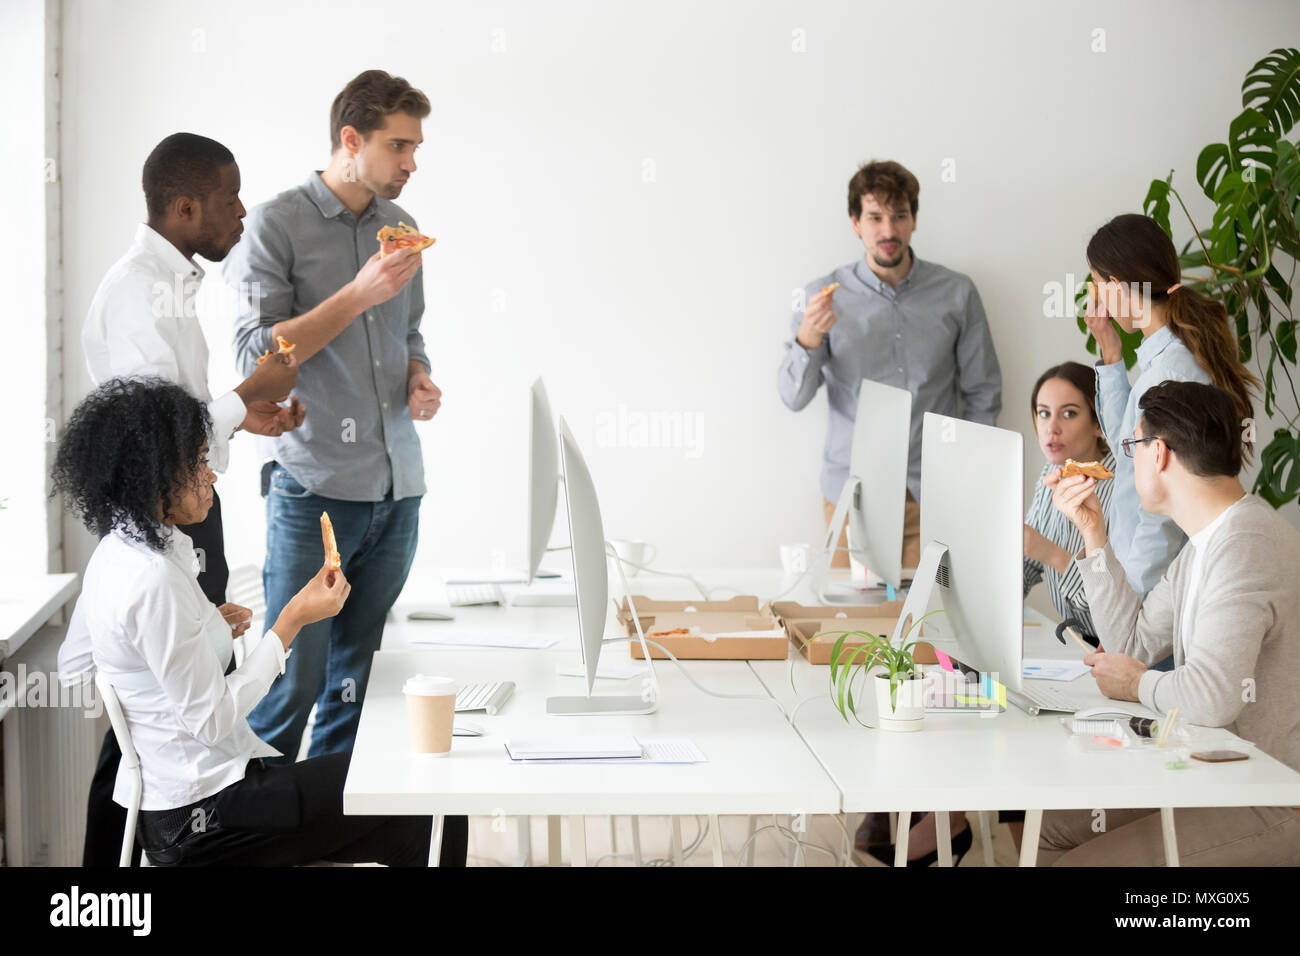 Multinational work group talking and eating pizza at workplace Stock Photo